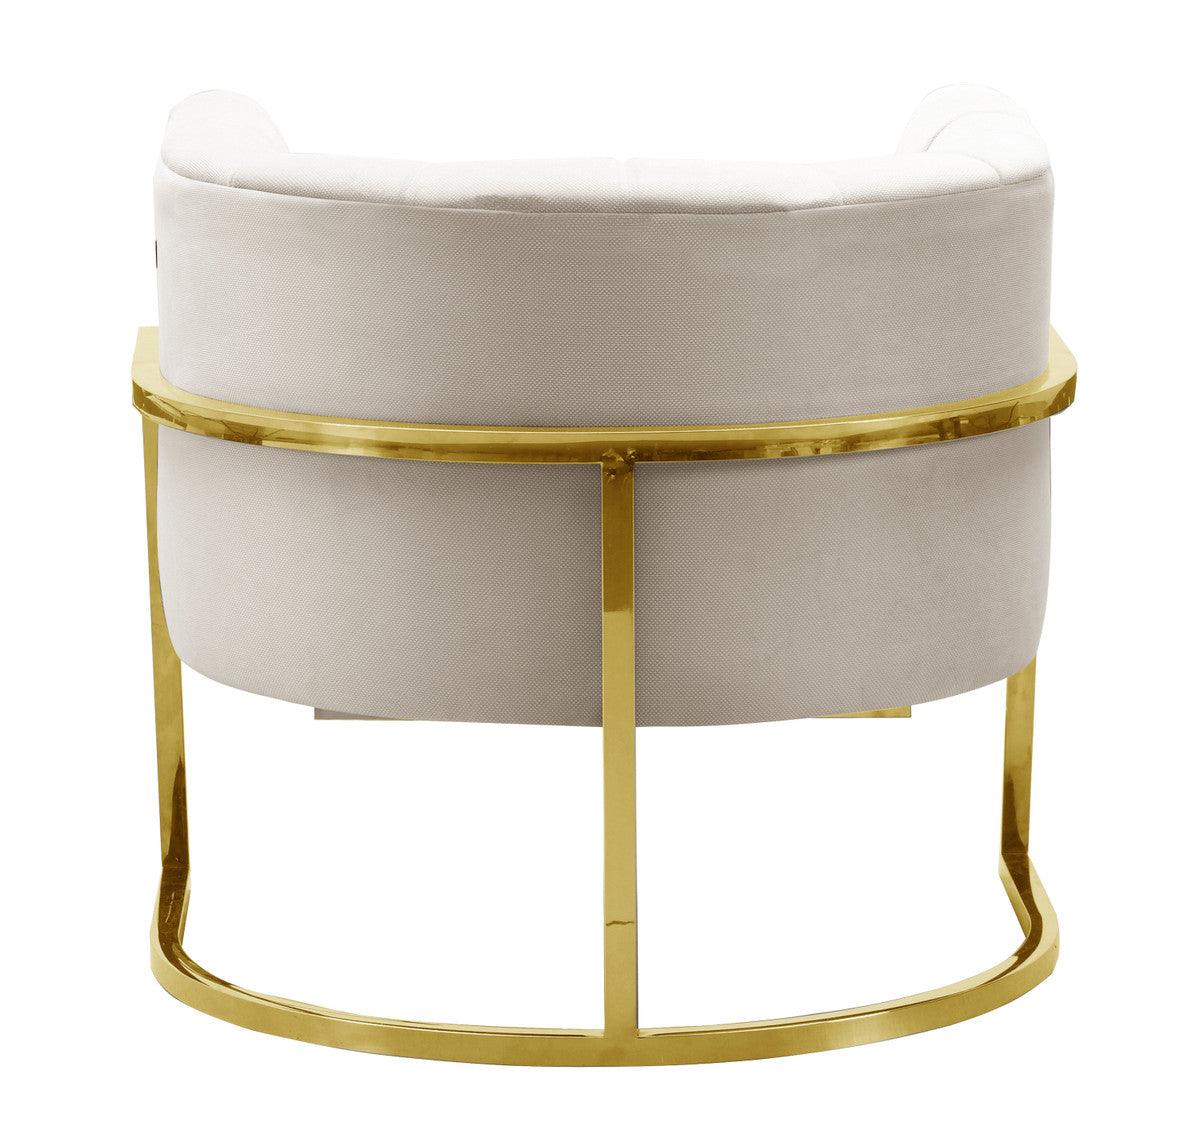 Magna Spotted Cream Chair with Gold Base - Euro Living Furniture